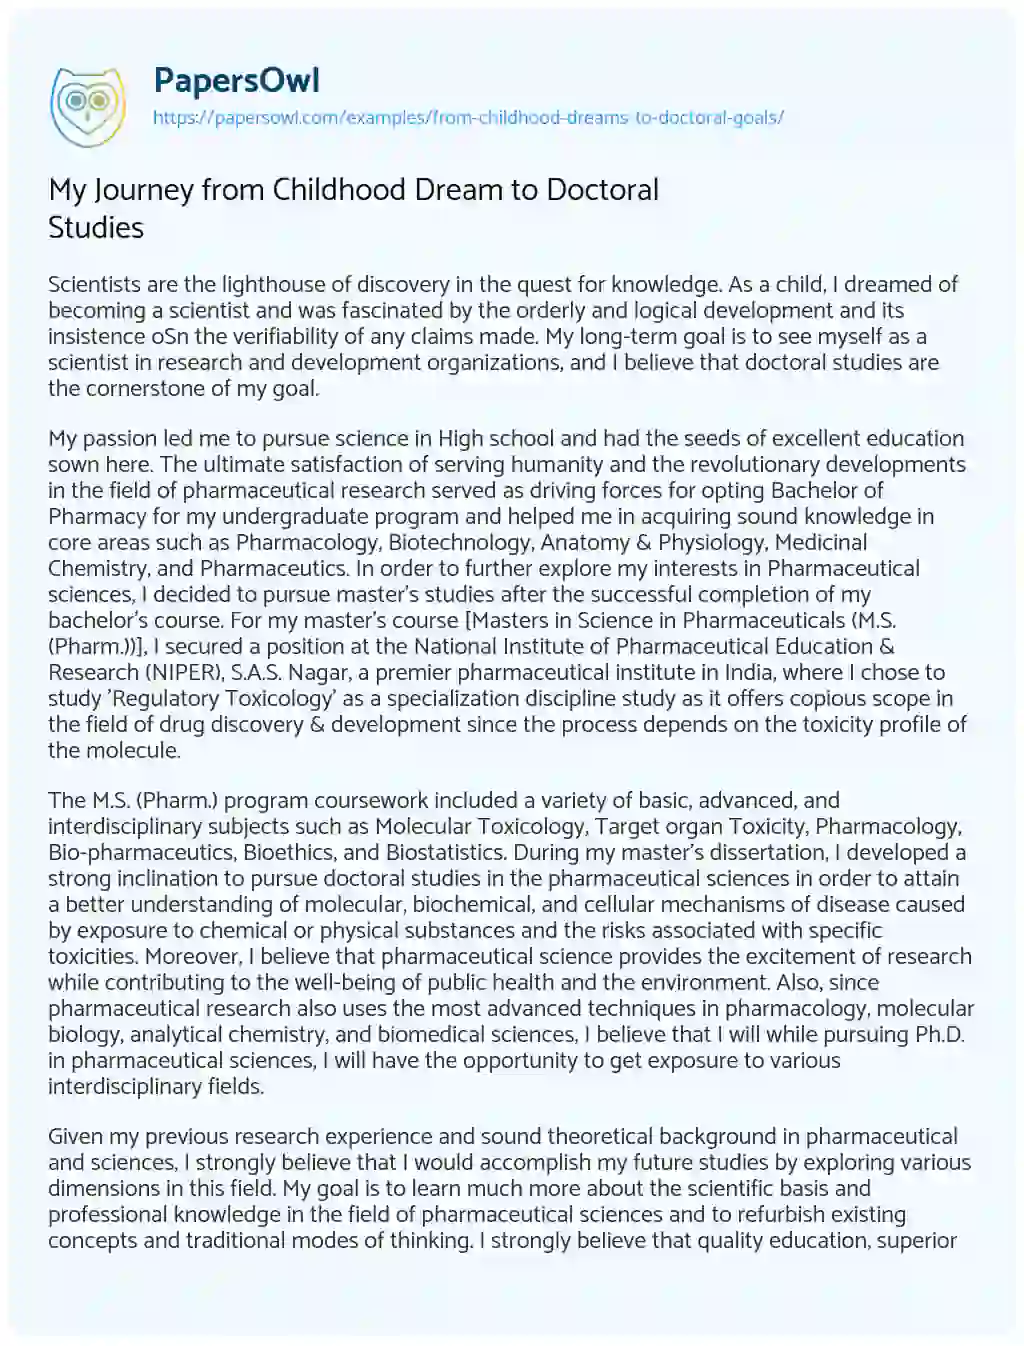 Essay on My Journey from Childhood Dream to Doctoral Studies